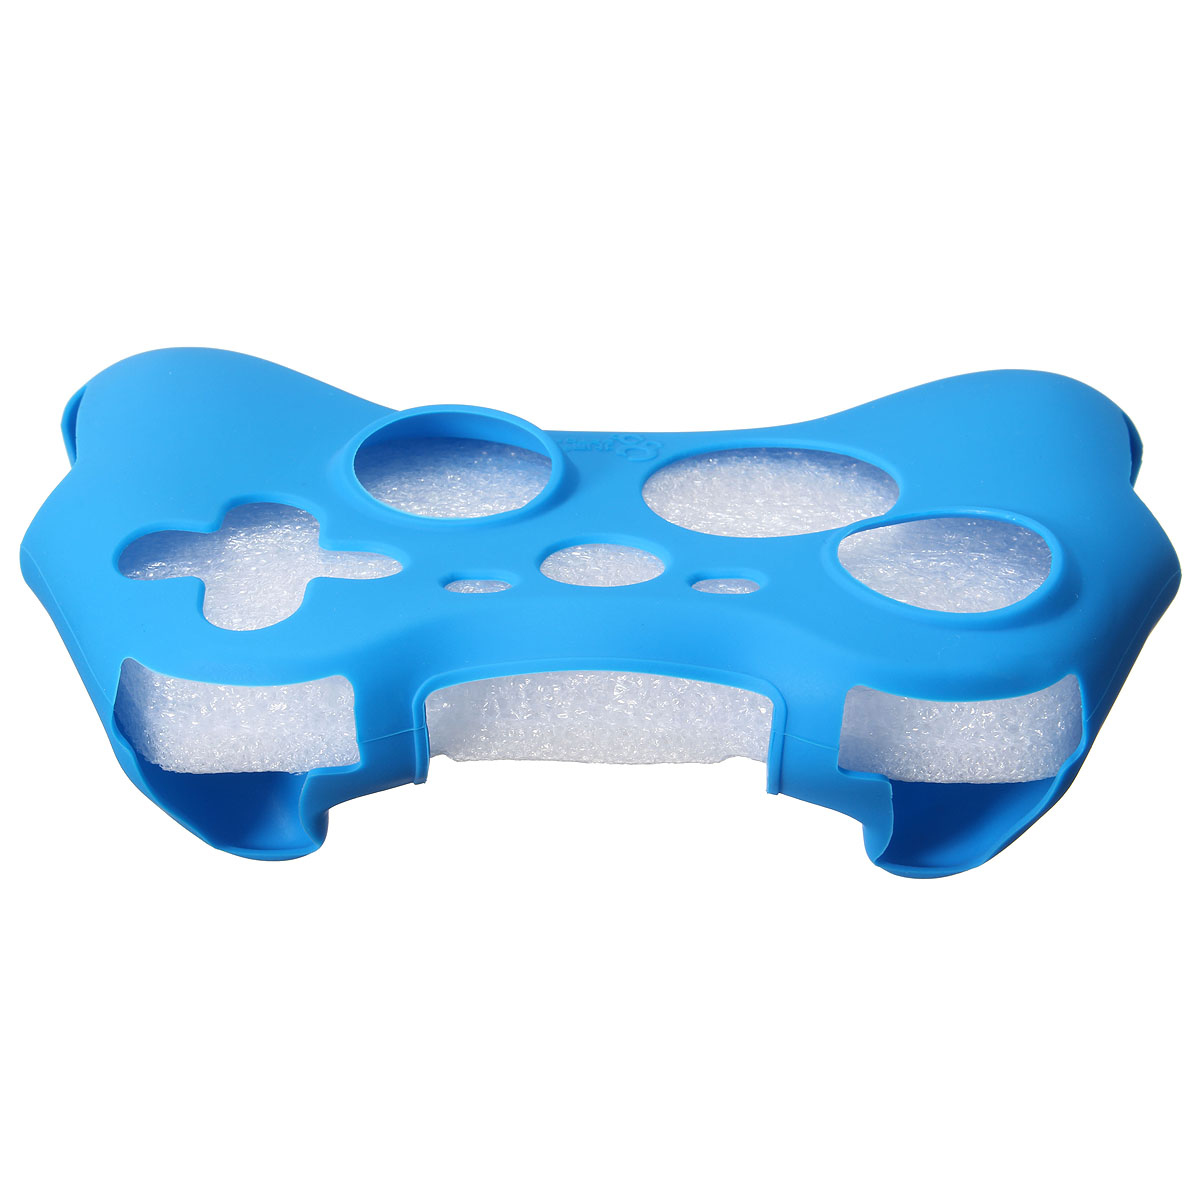 BETOP-Computer-Game-Handle-Silicone-Case-Protective-Cover-1143422